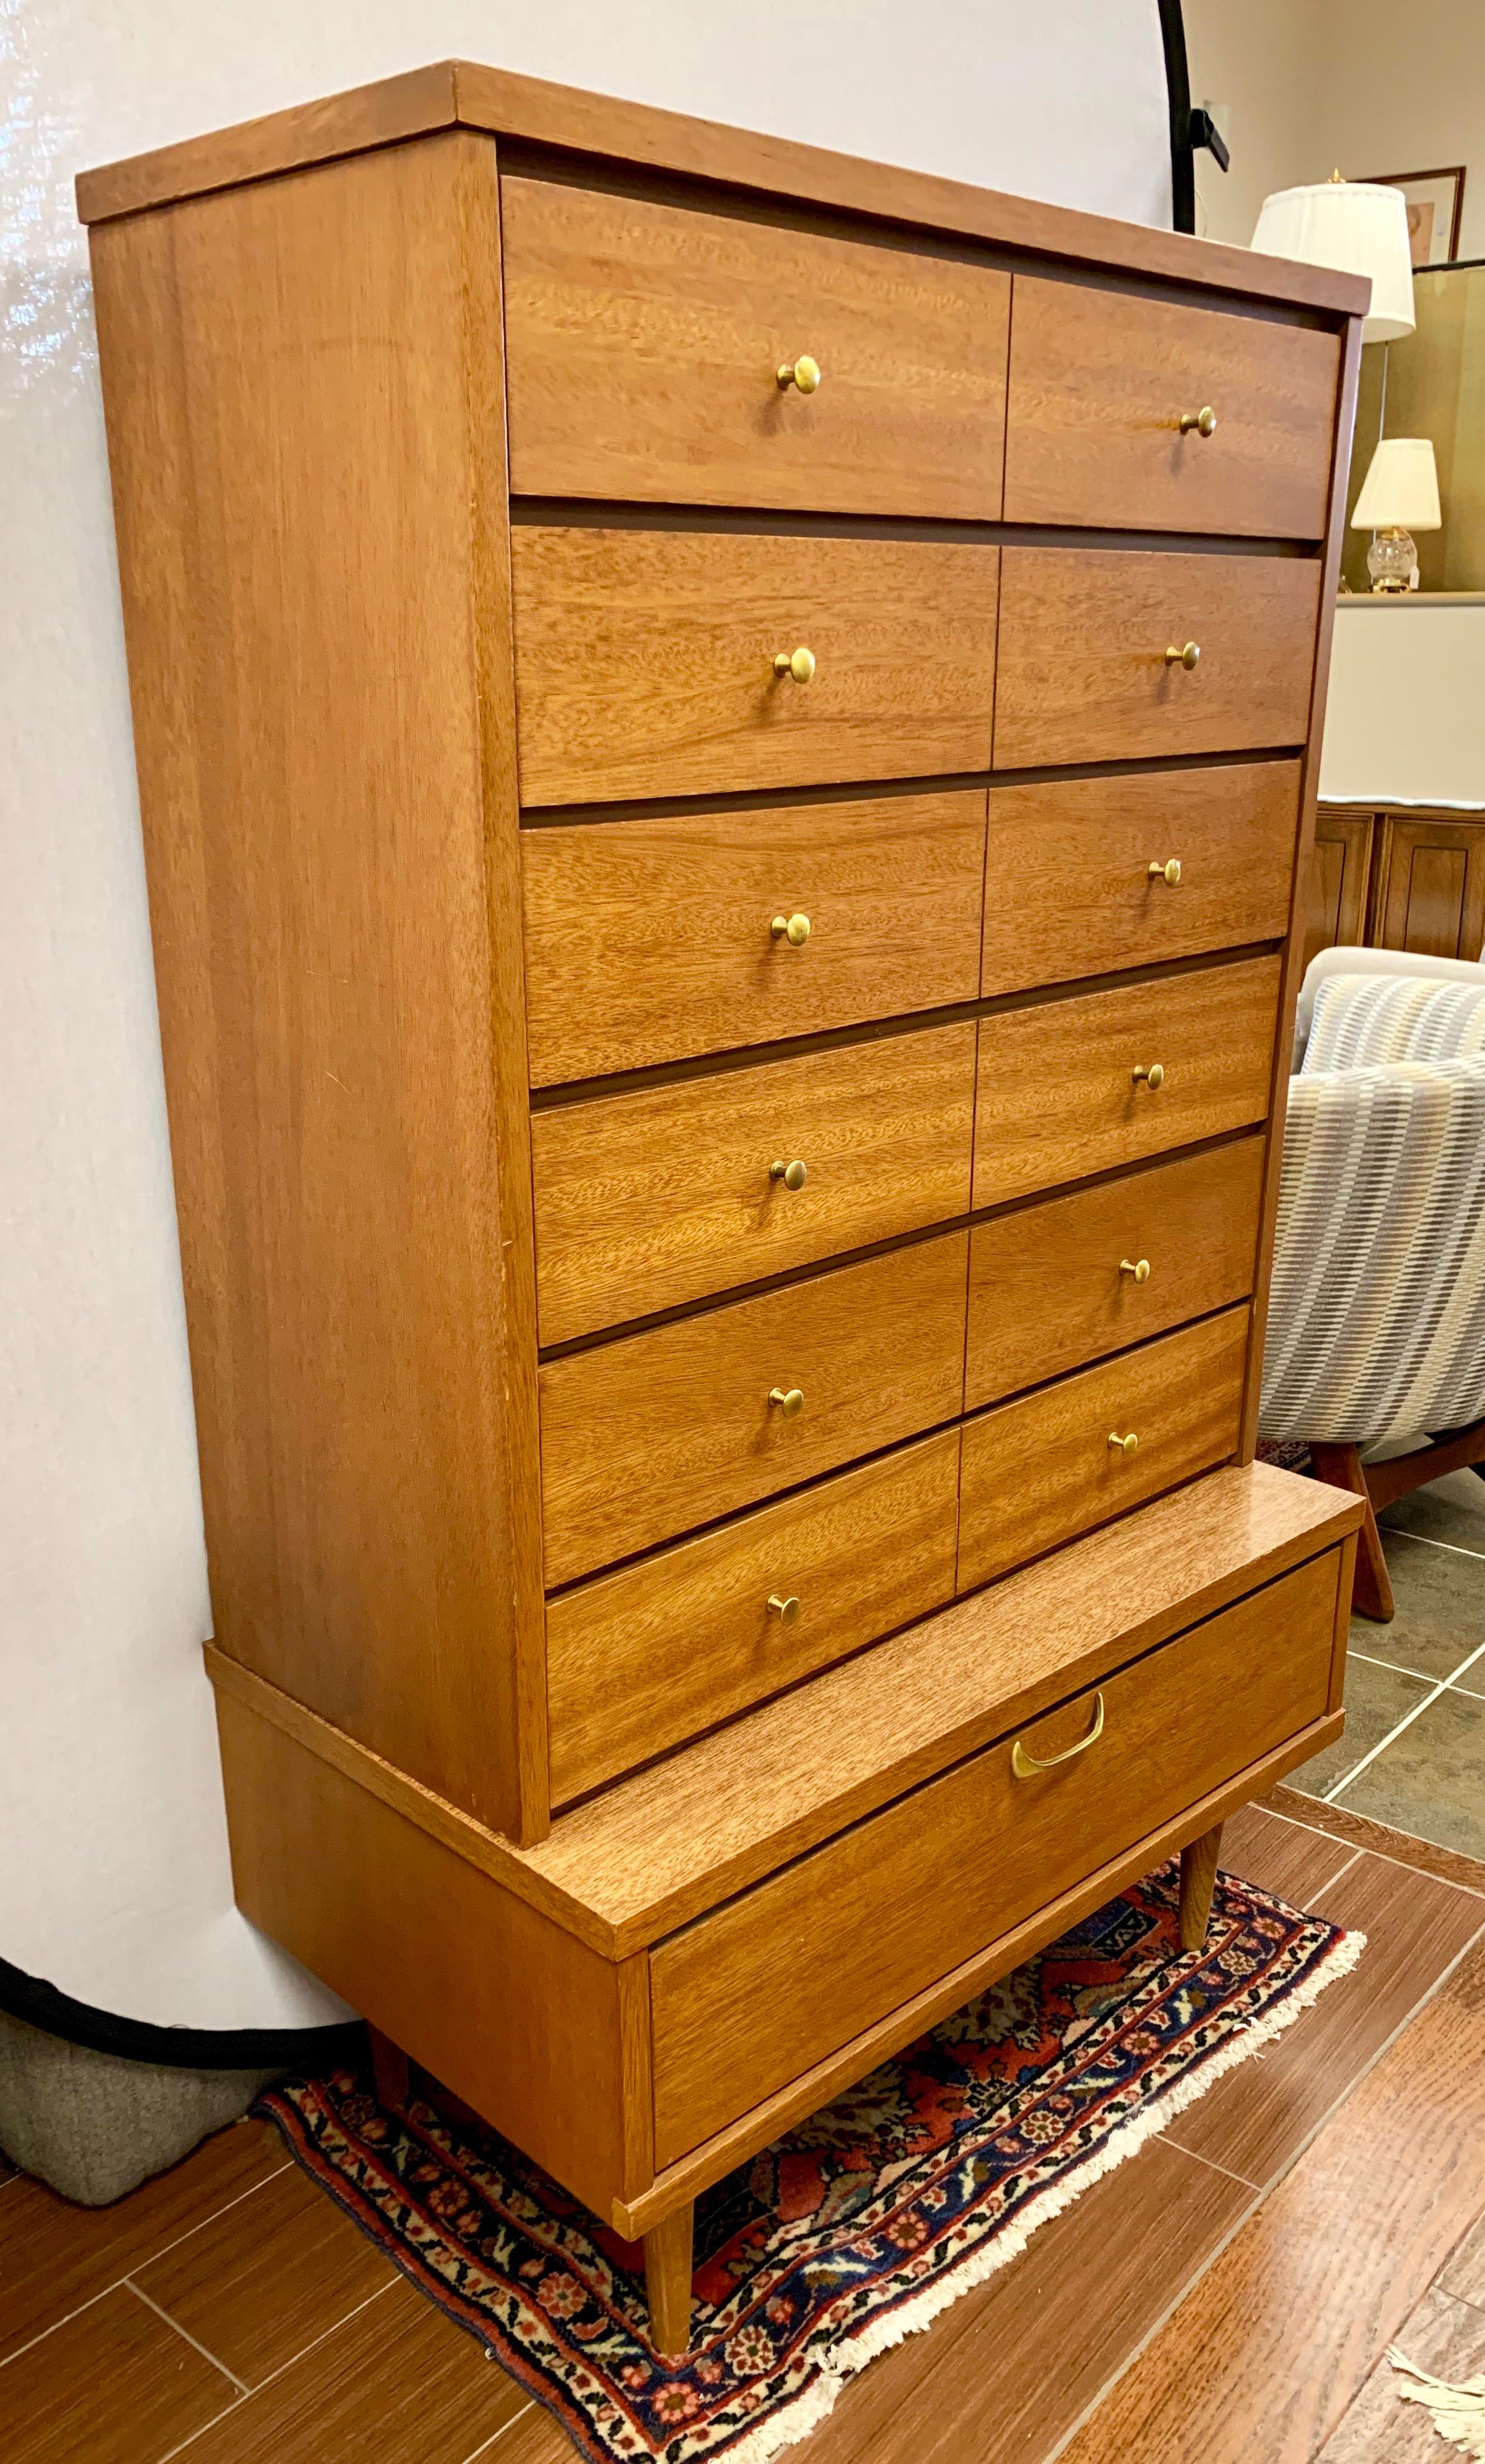 Elegant seven drawer tall mens wardrobe done with wood and veneer, circa 1960s. There are no hallmarks on the Danish Modern style chest of drawers. The lines are magnificent and the dresser comes in two pieces, a top and a bottom. There are six